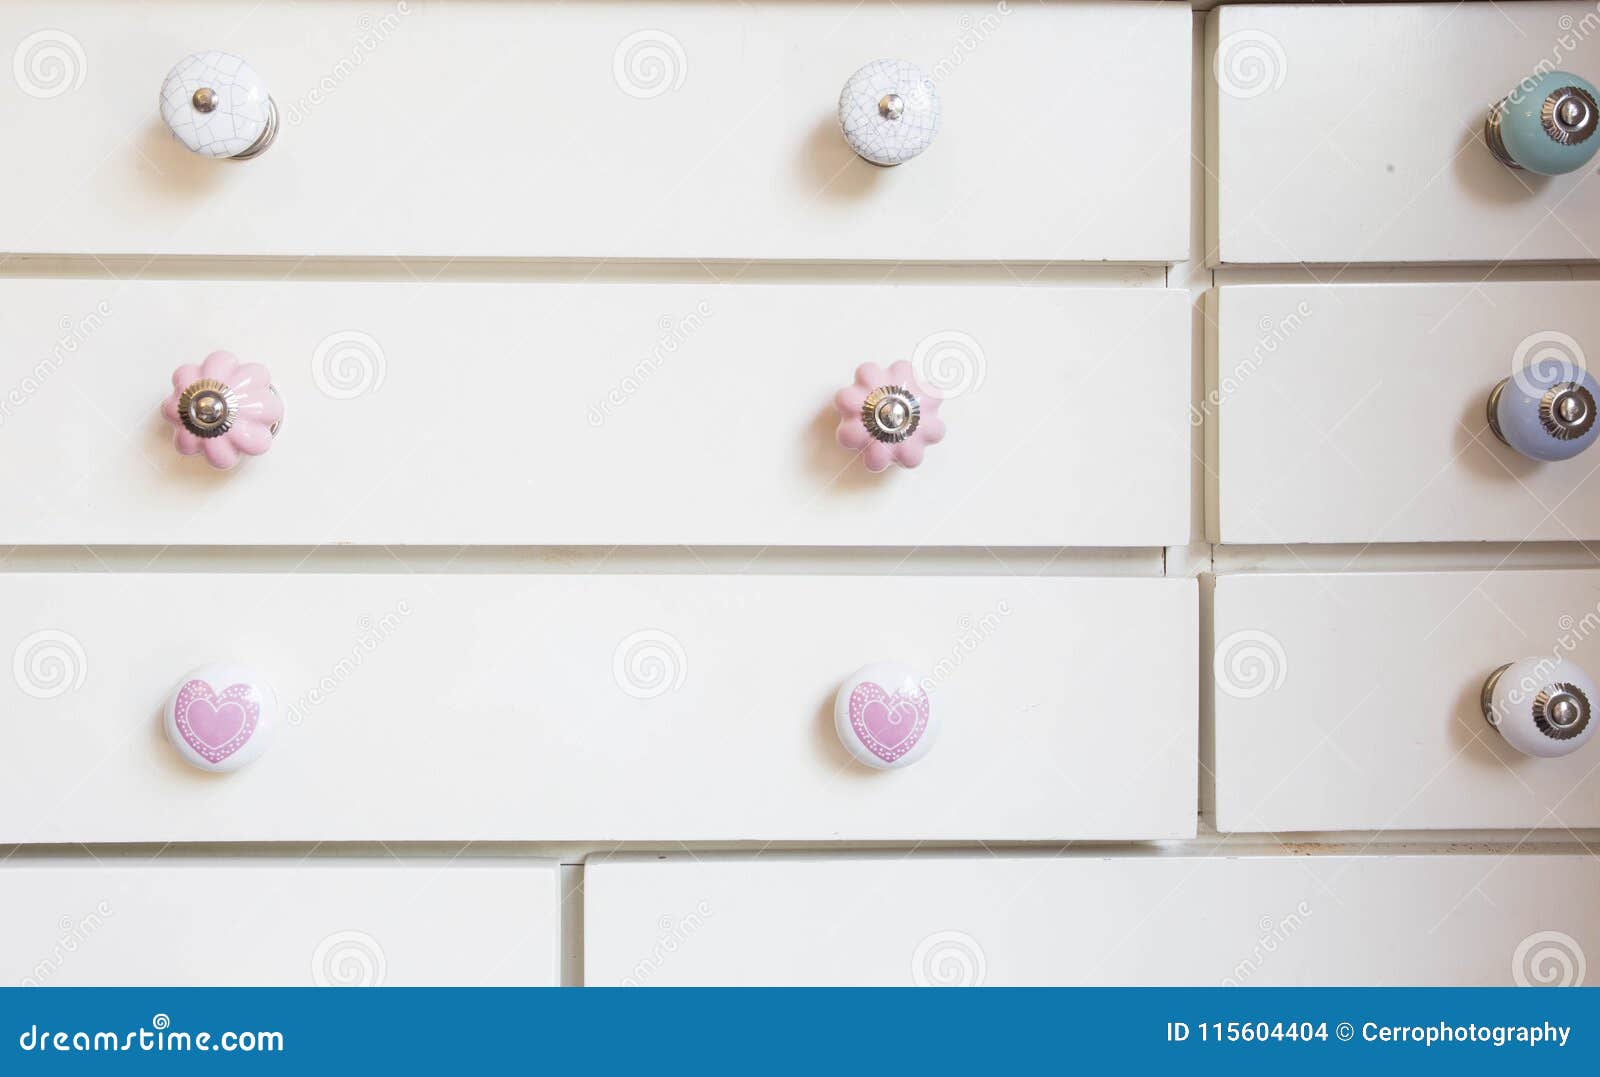 White Closet Doors With Colorful Knobs Stock Photo Image Of